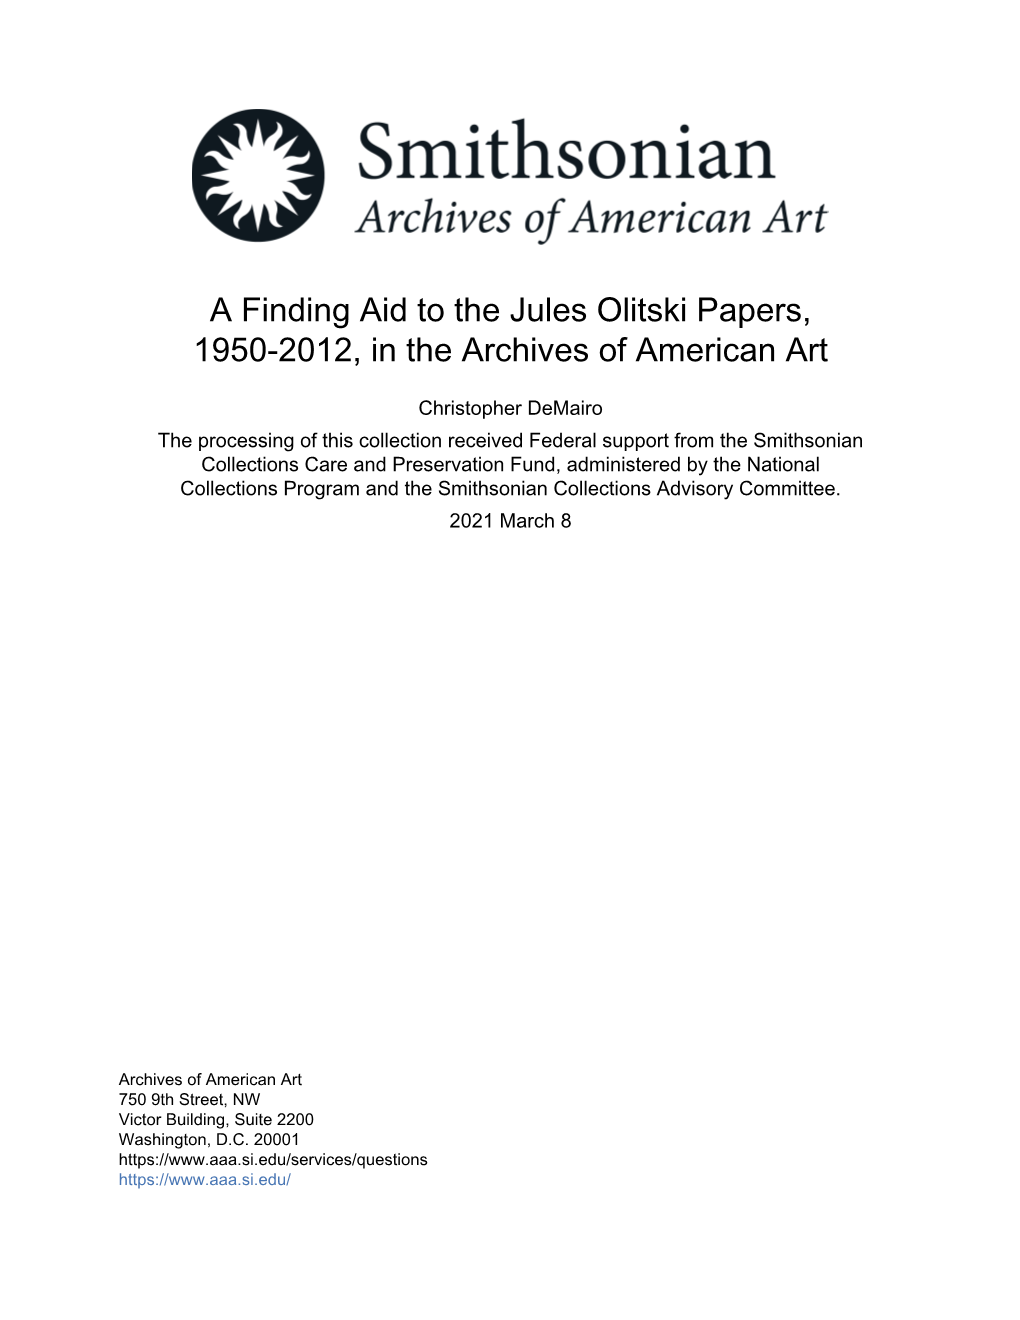 A Finding Aid to the Jules Olitski Papers, 1950-2012, in the Archives of American Art